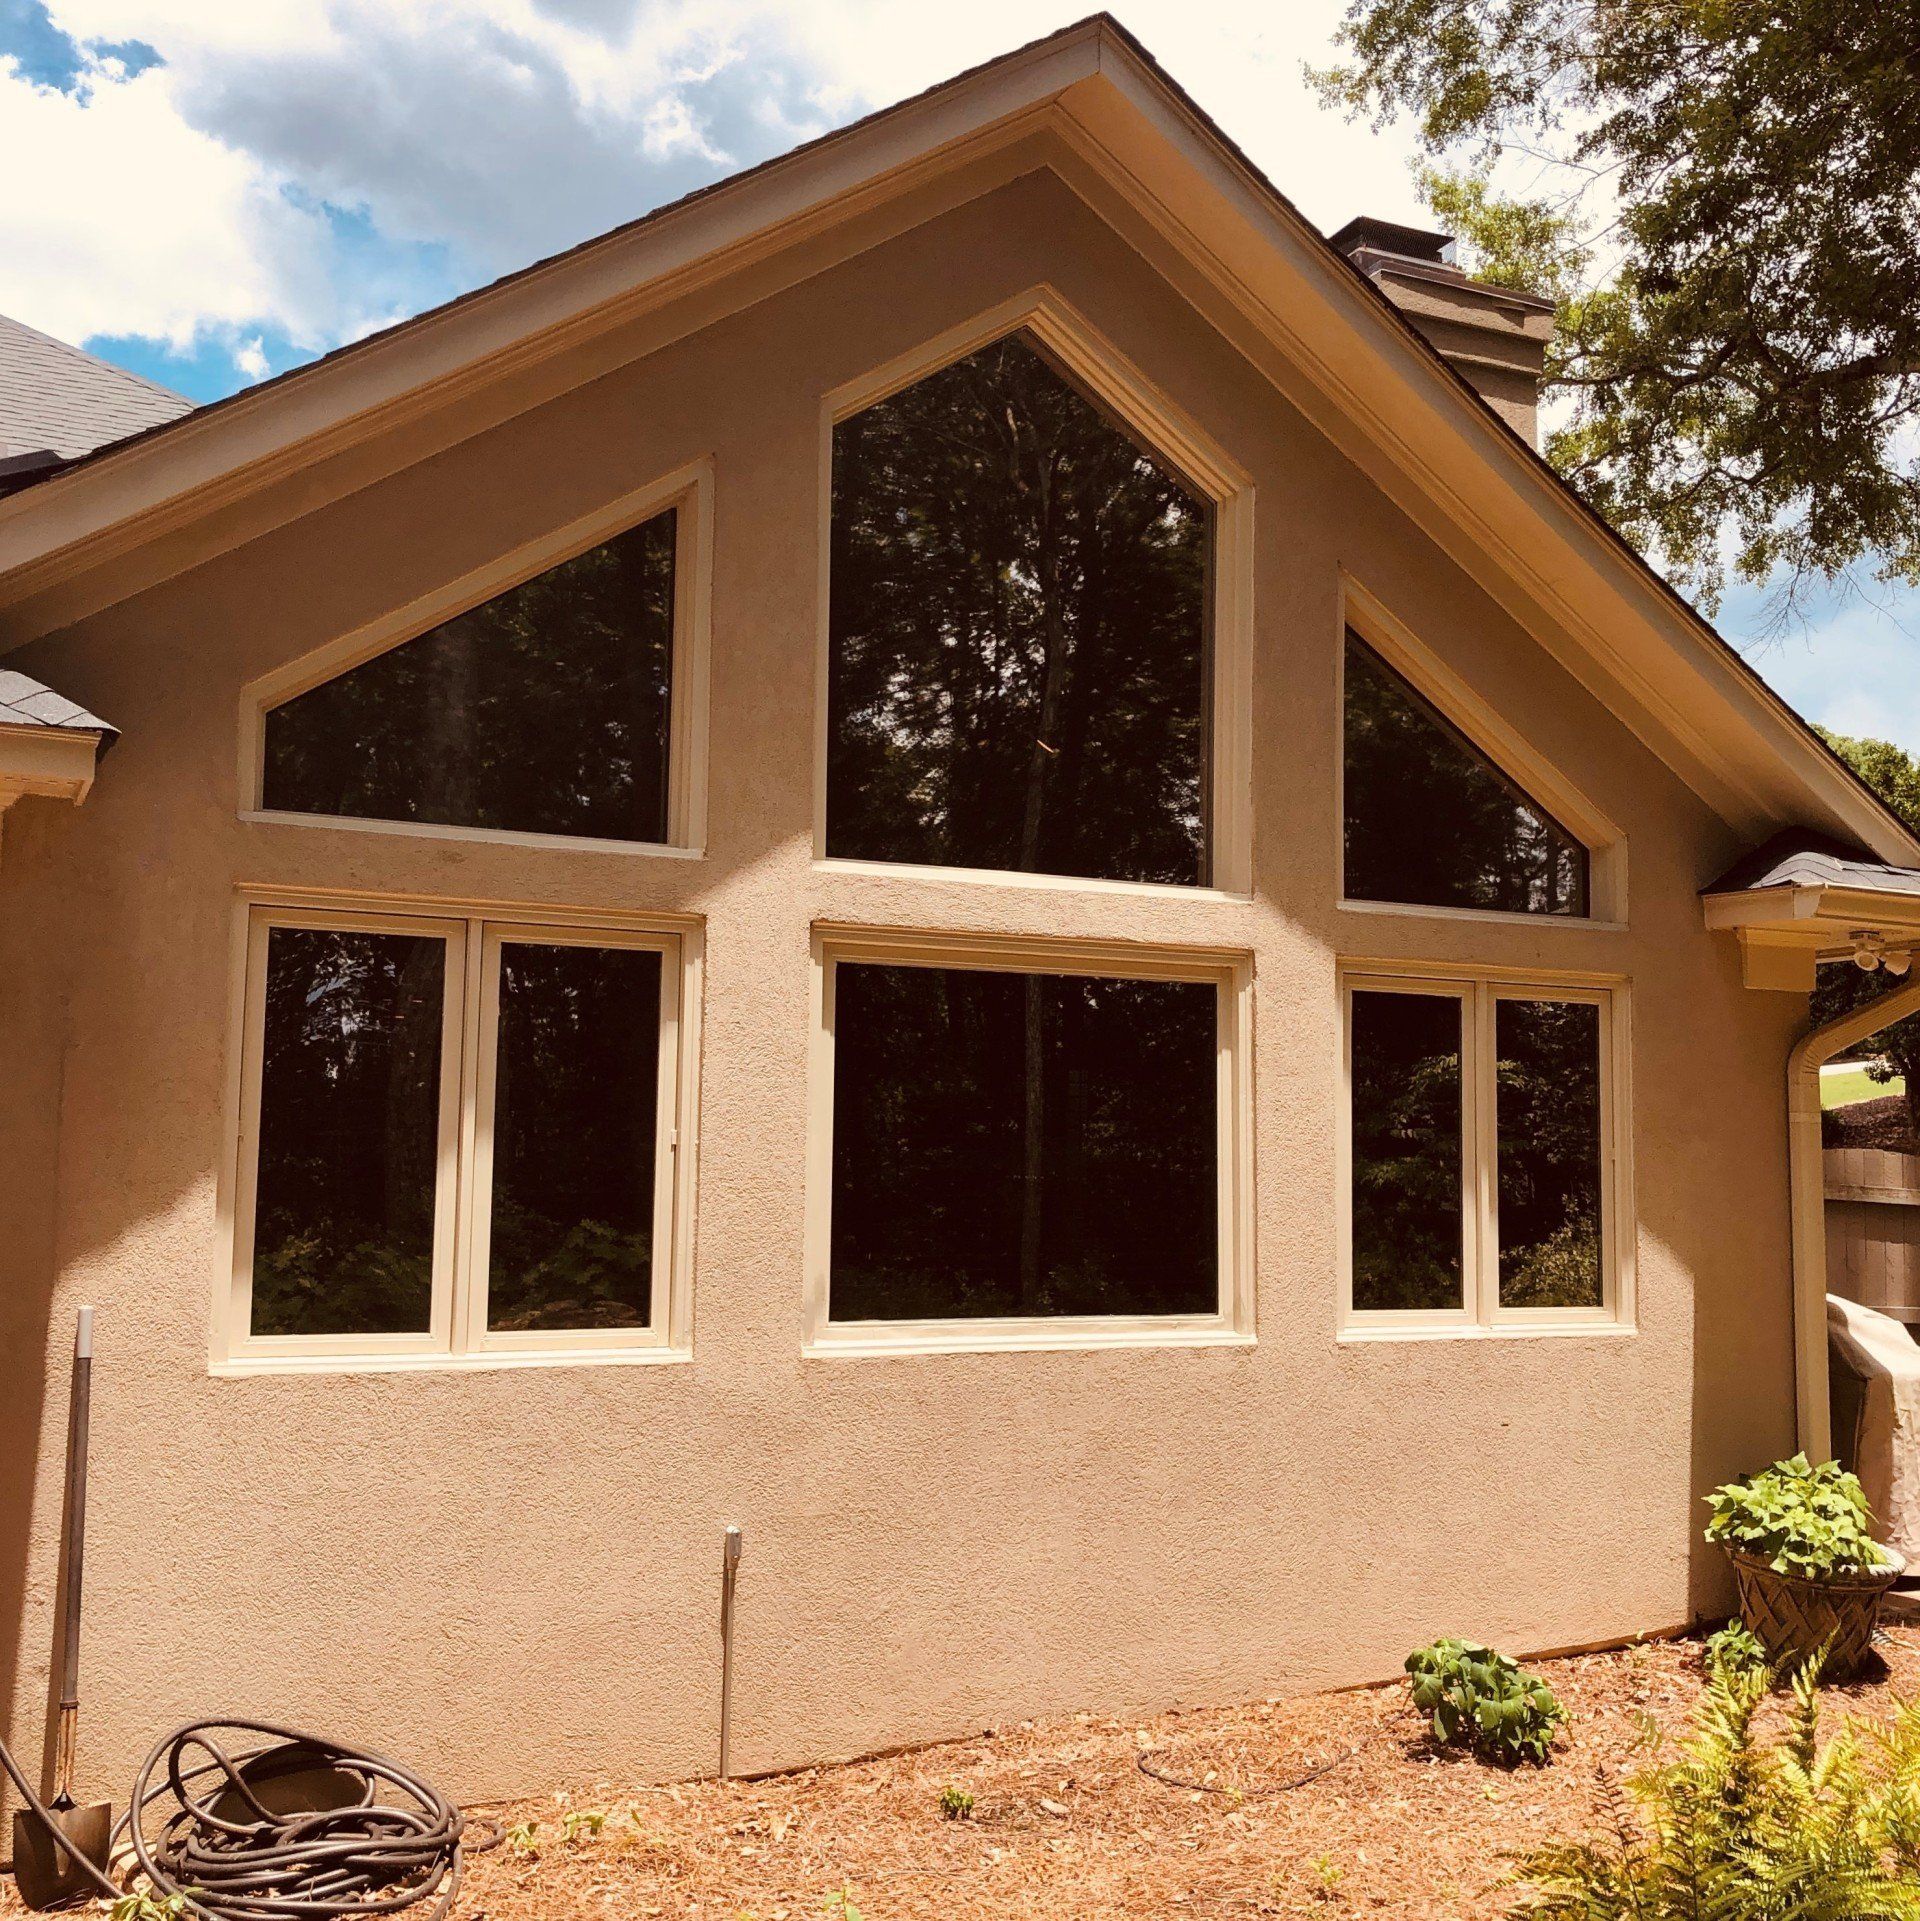 SPF Tint installed to home windows - This home is now cool inside with SPF Performance Residential Tint was installed to the Sunroom windows